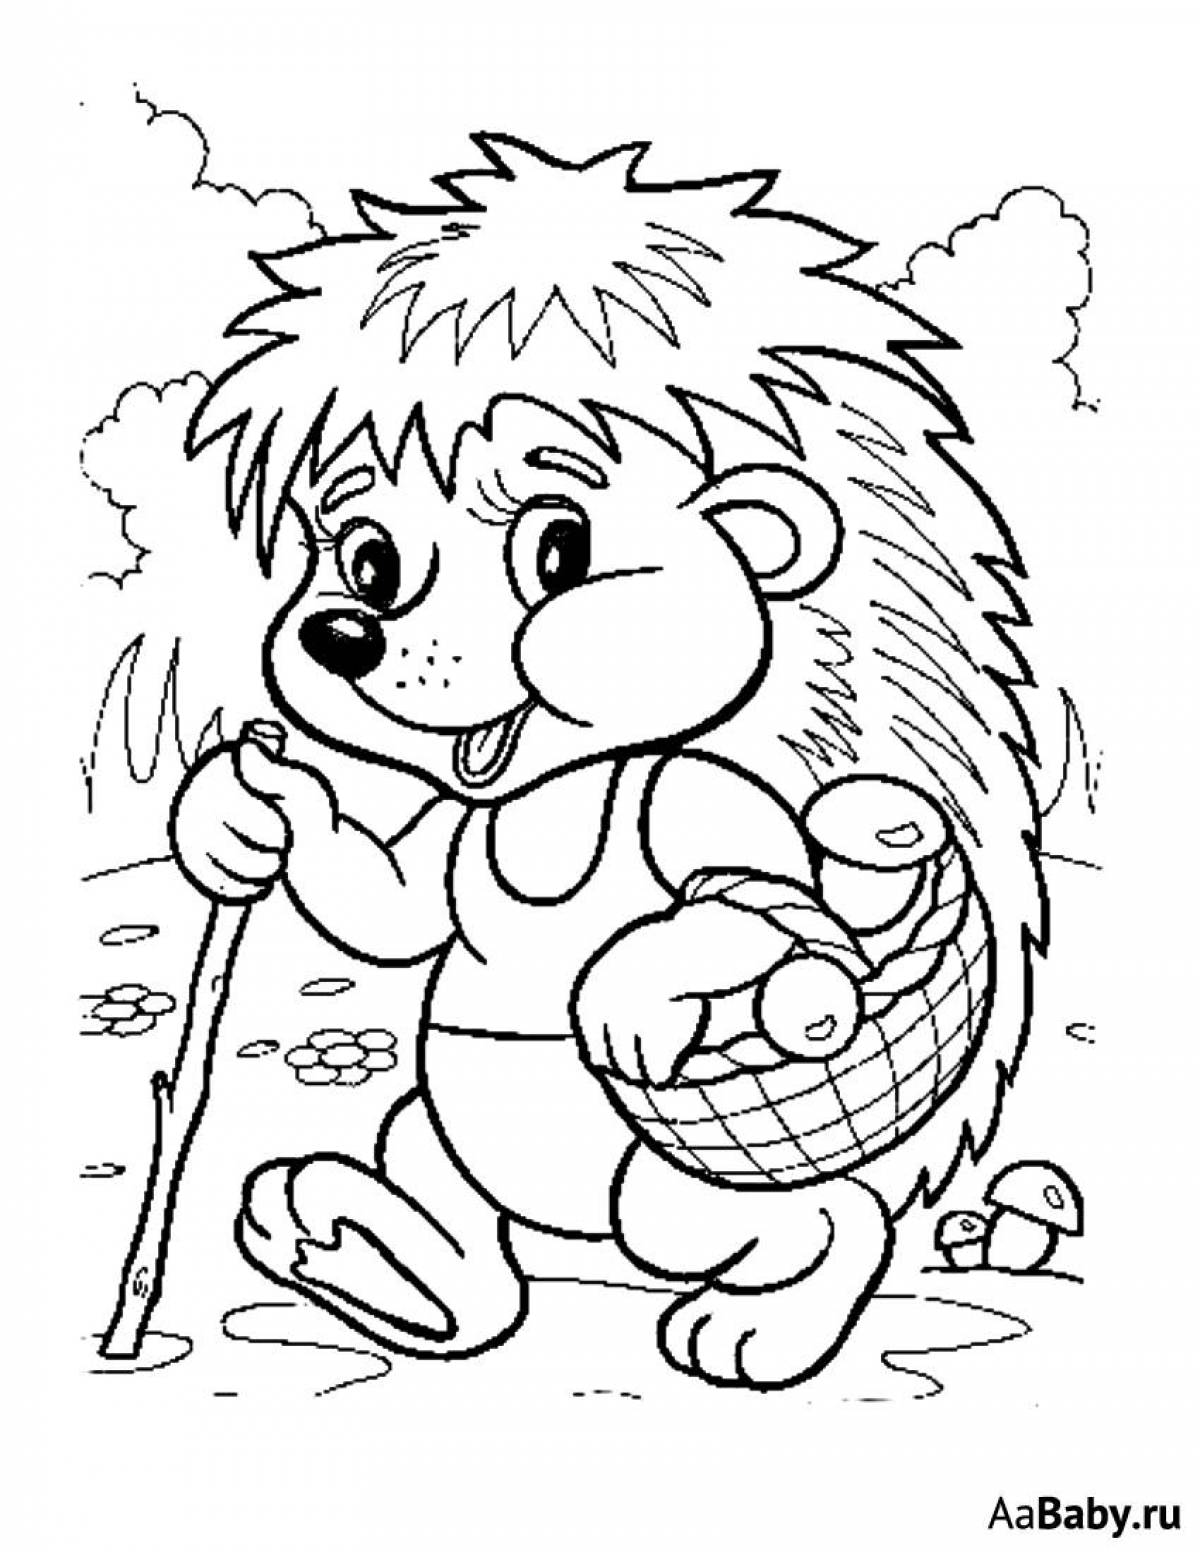 Exquisite hedgehog coloring book for kids